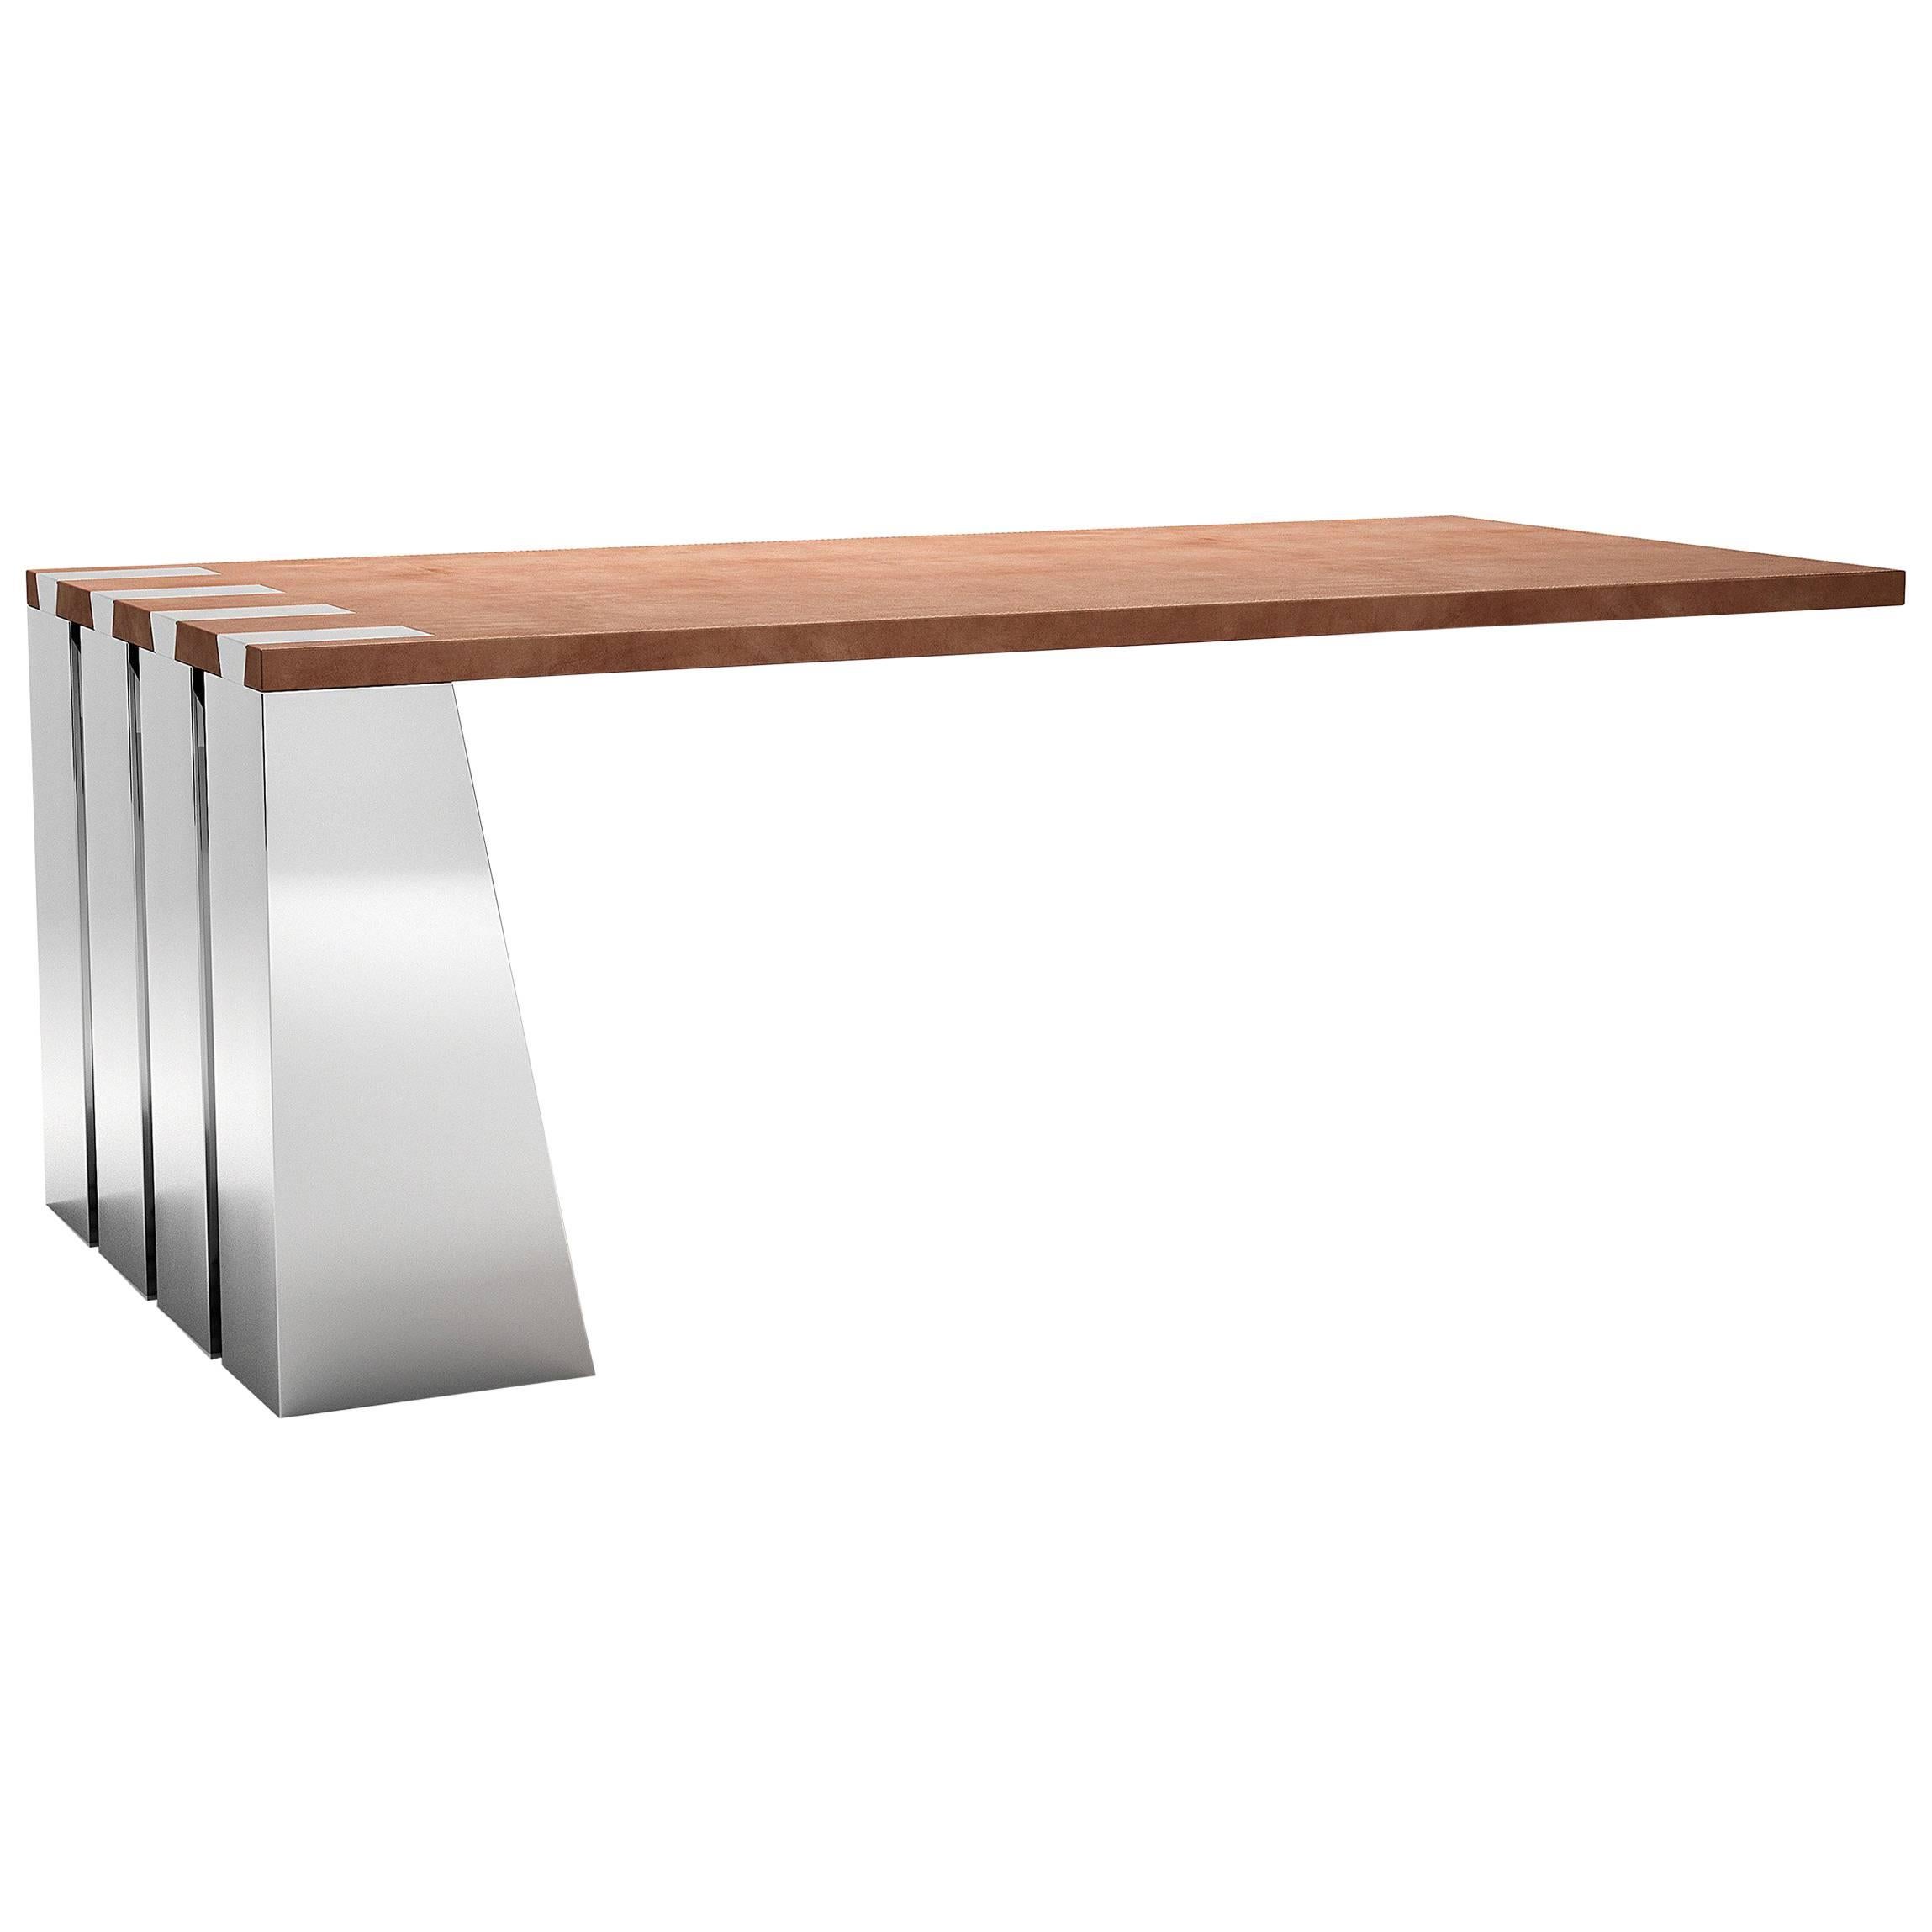 Stainless Steel and Leather Desk 'Zeus' N°1 /8 by Vincent Poujardieu For Sale